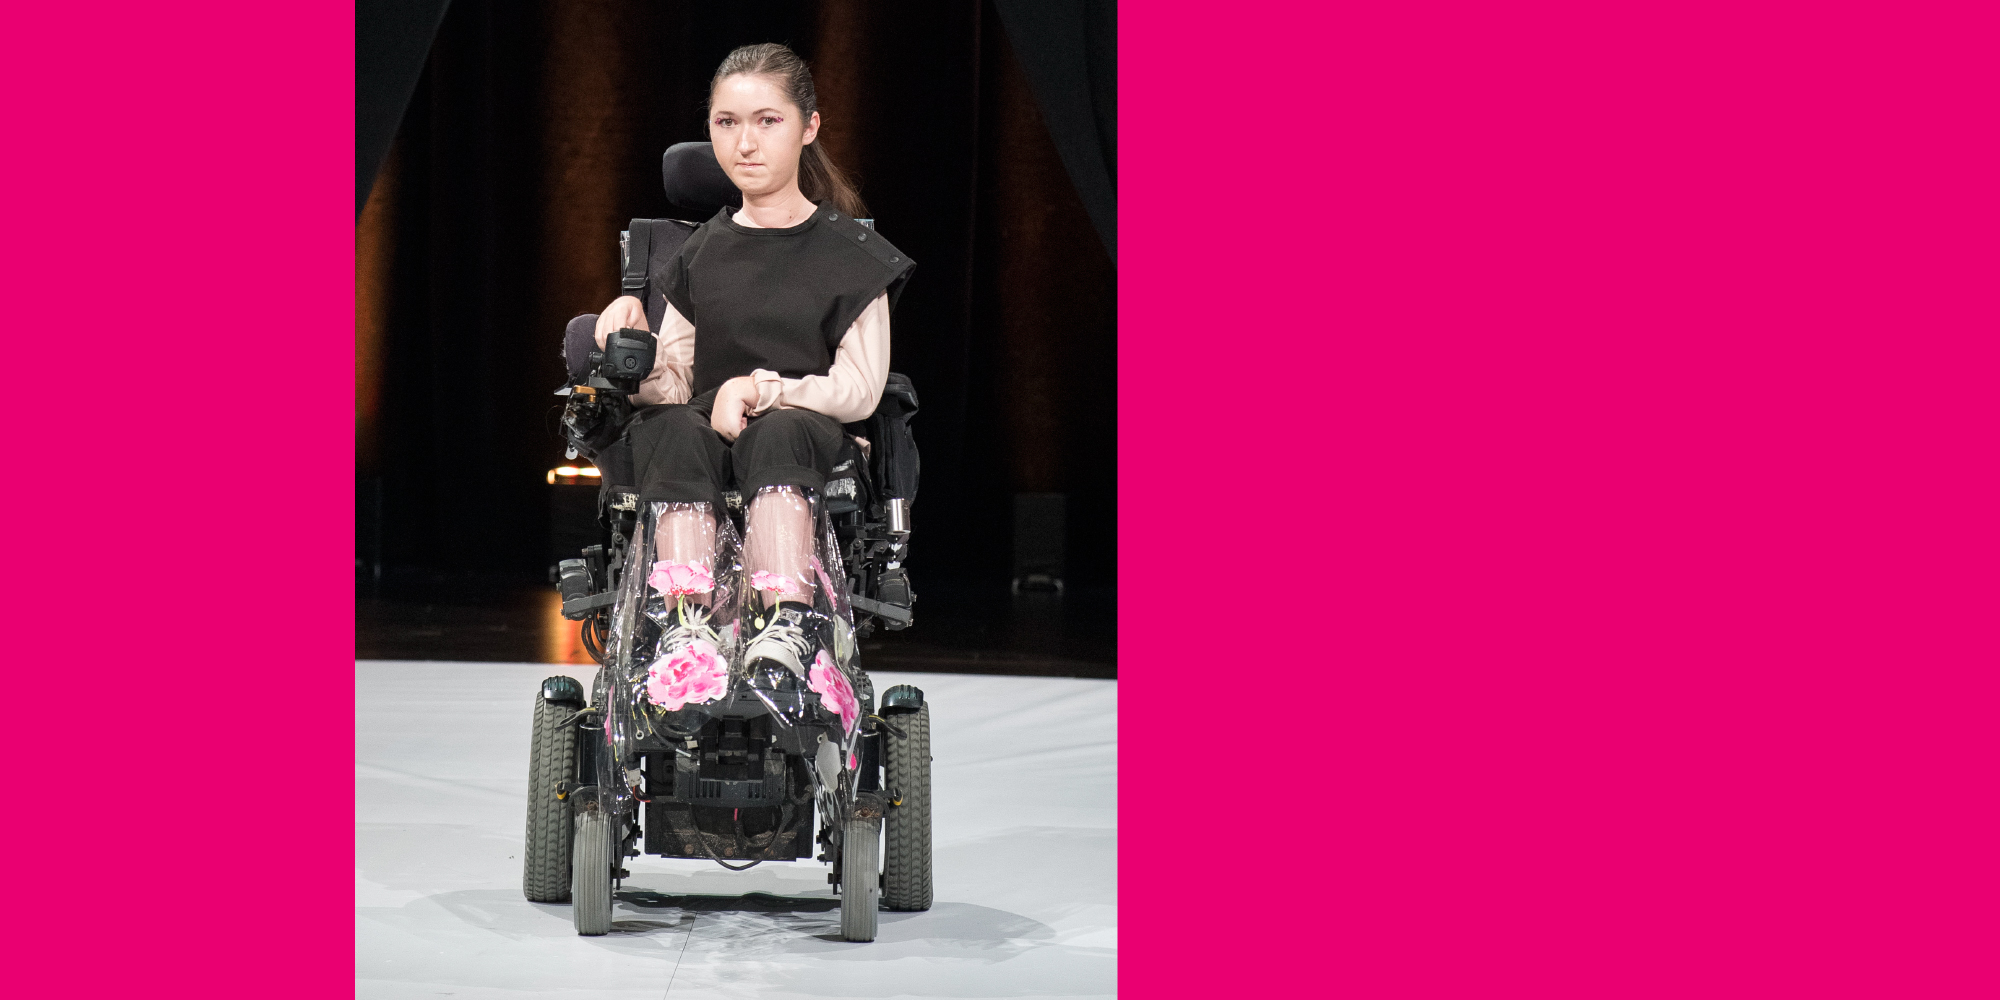 A model on a wheelchair wearing a UN•FORM black dress with clear plastic bottom finishing designed by Fashion Design Alumna, Sonia Prancho.